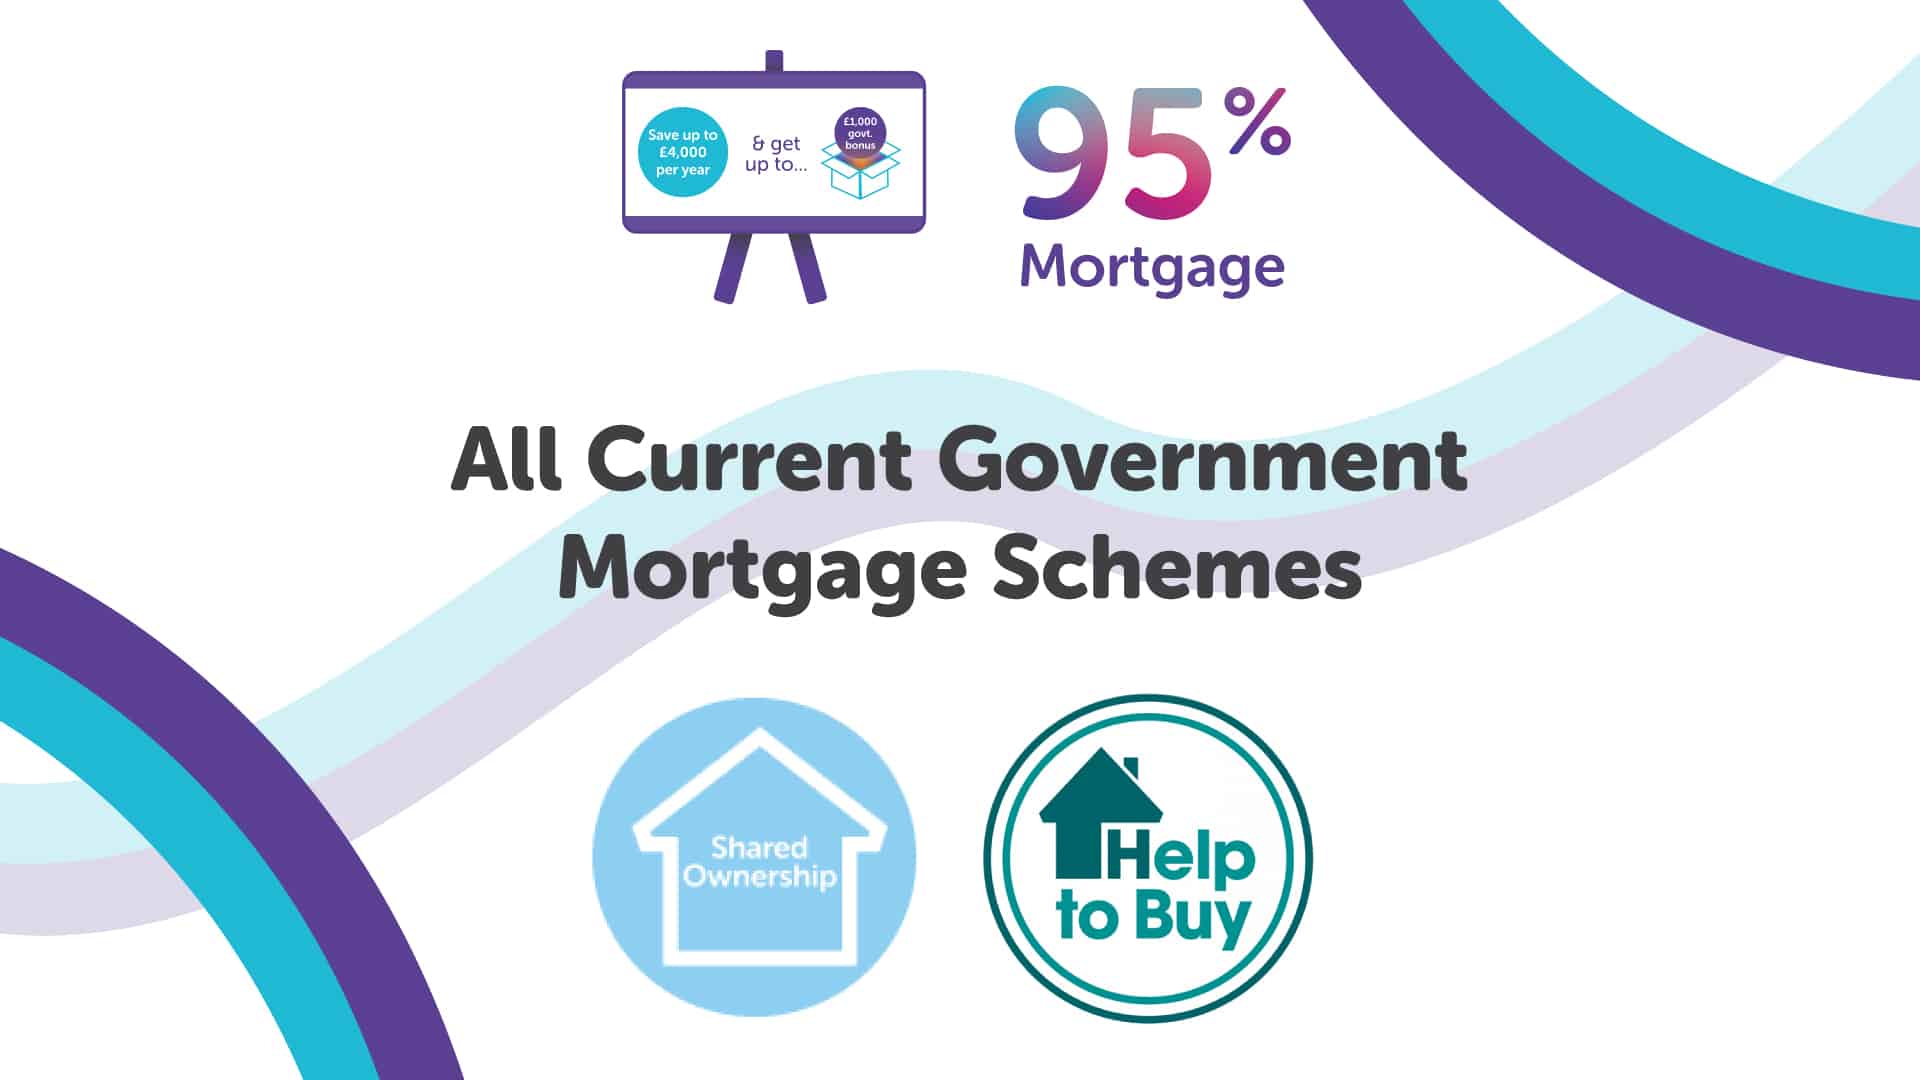 Different Help to Buy Mortgage Schemes in Leeds